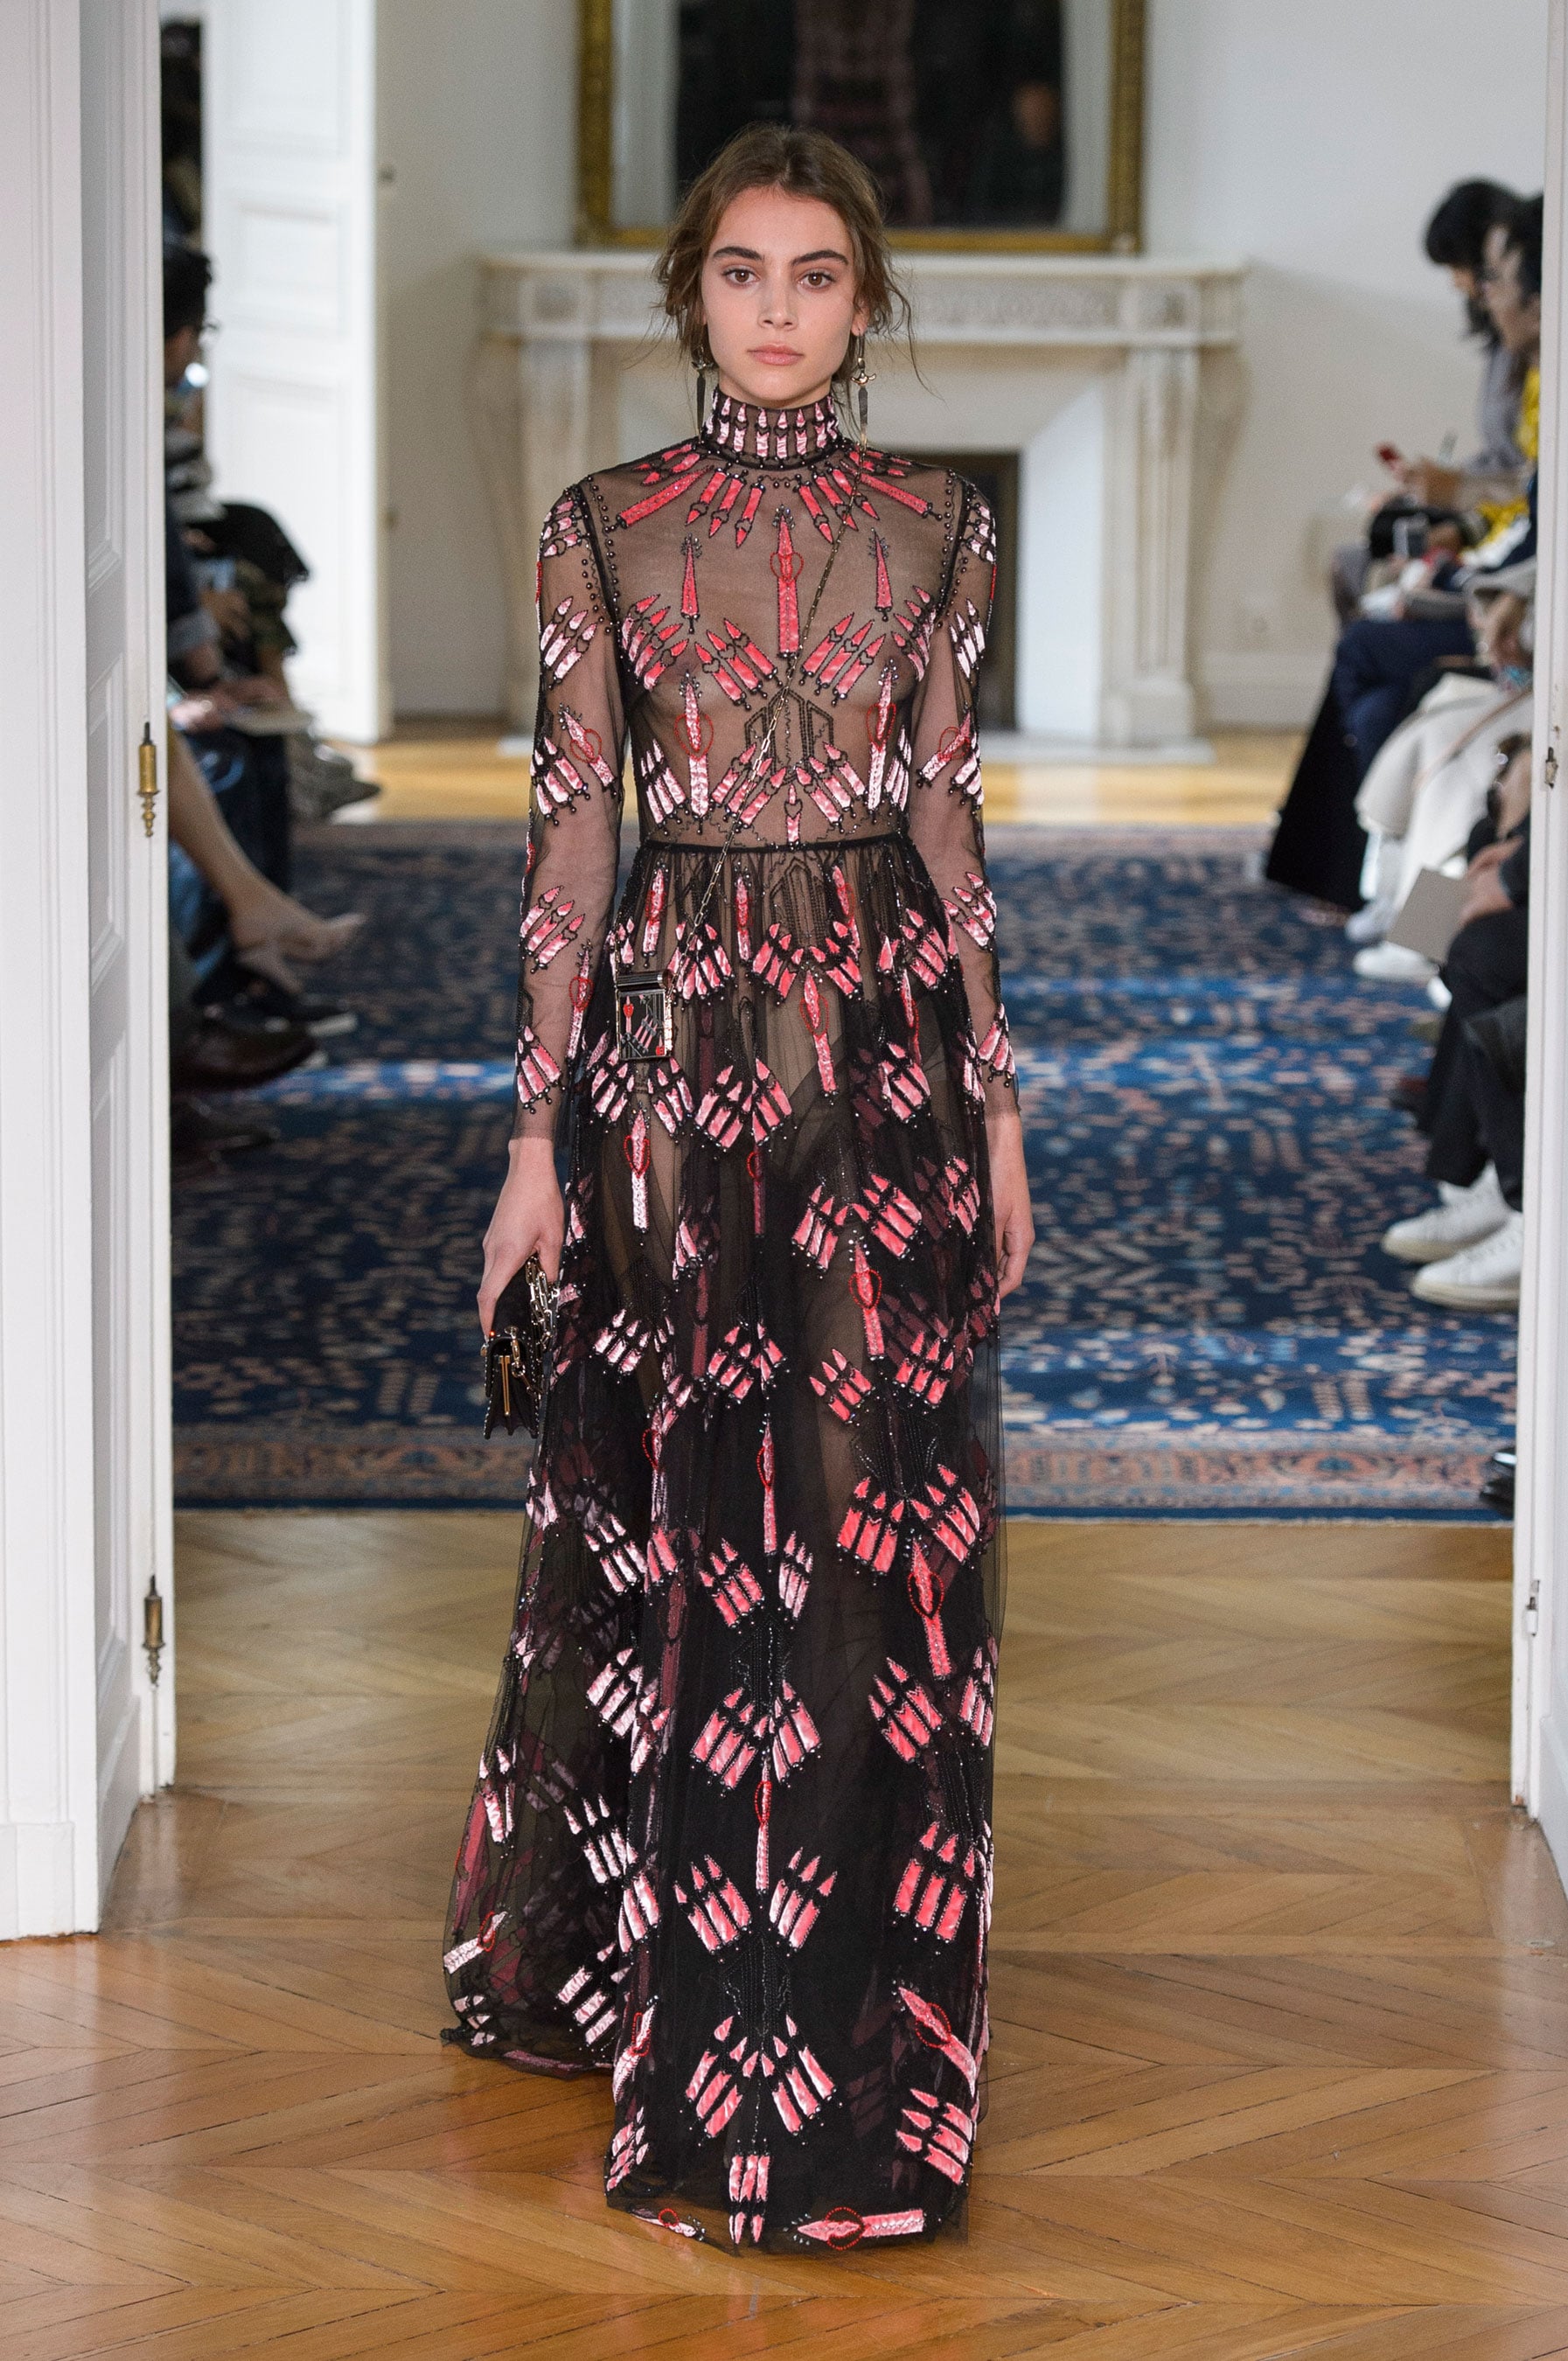 The Valentino Spring 2017 collection debuted at Paris Fashion Week on Sienna Miller Up Her Spring '17 Gowns Faster Than You Can Say Lanvin | POPSUGAR Fashion Photo 65